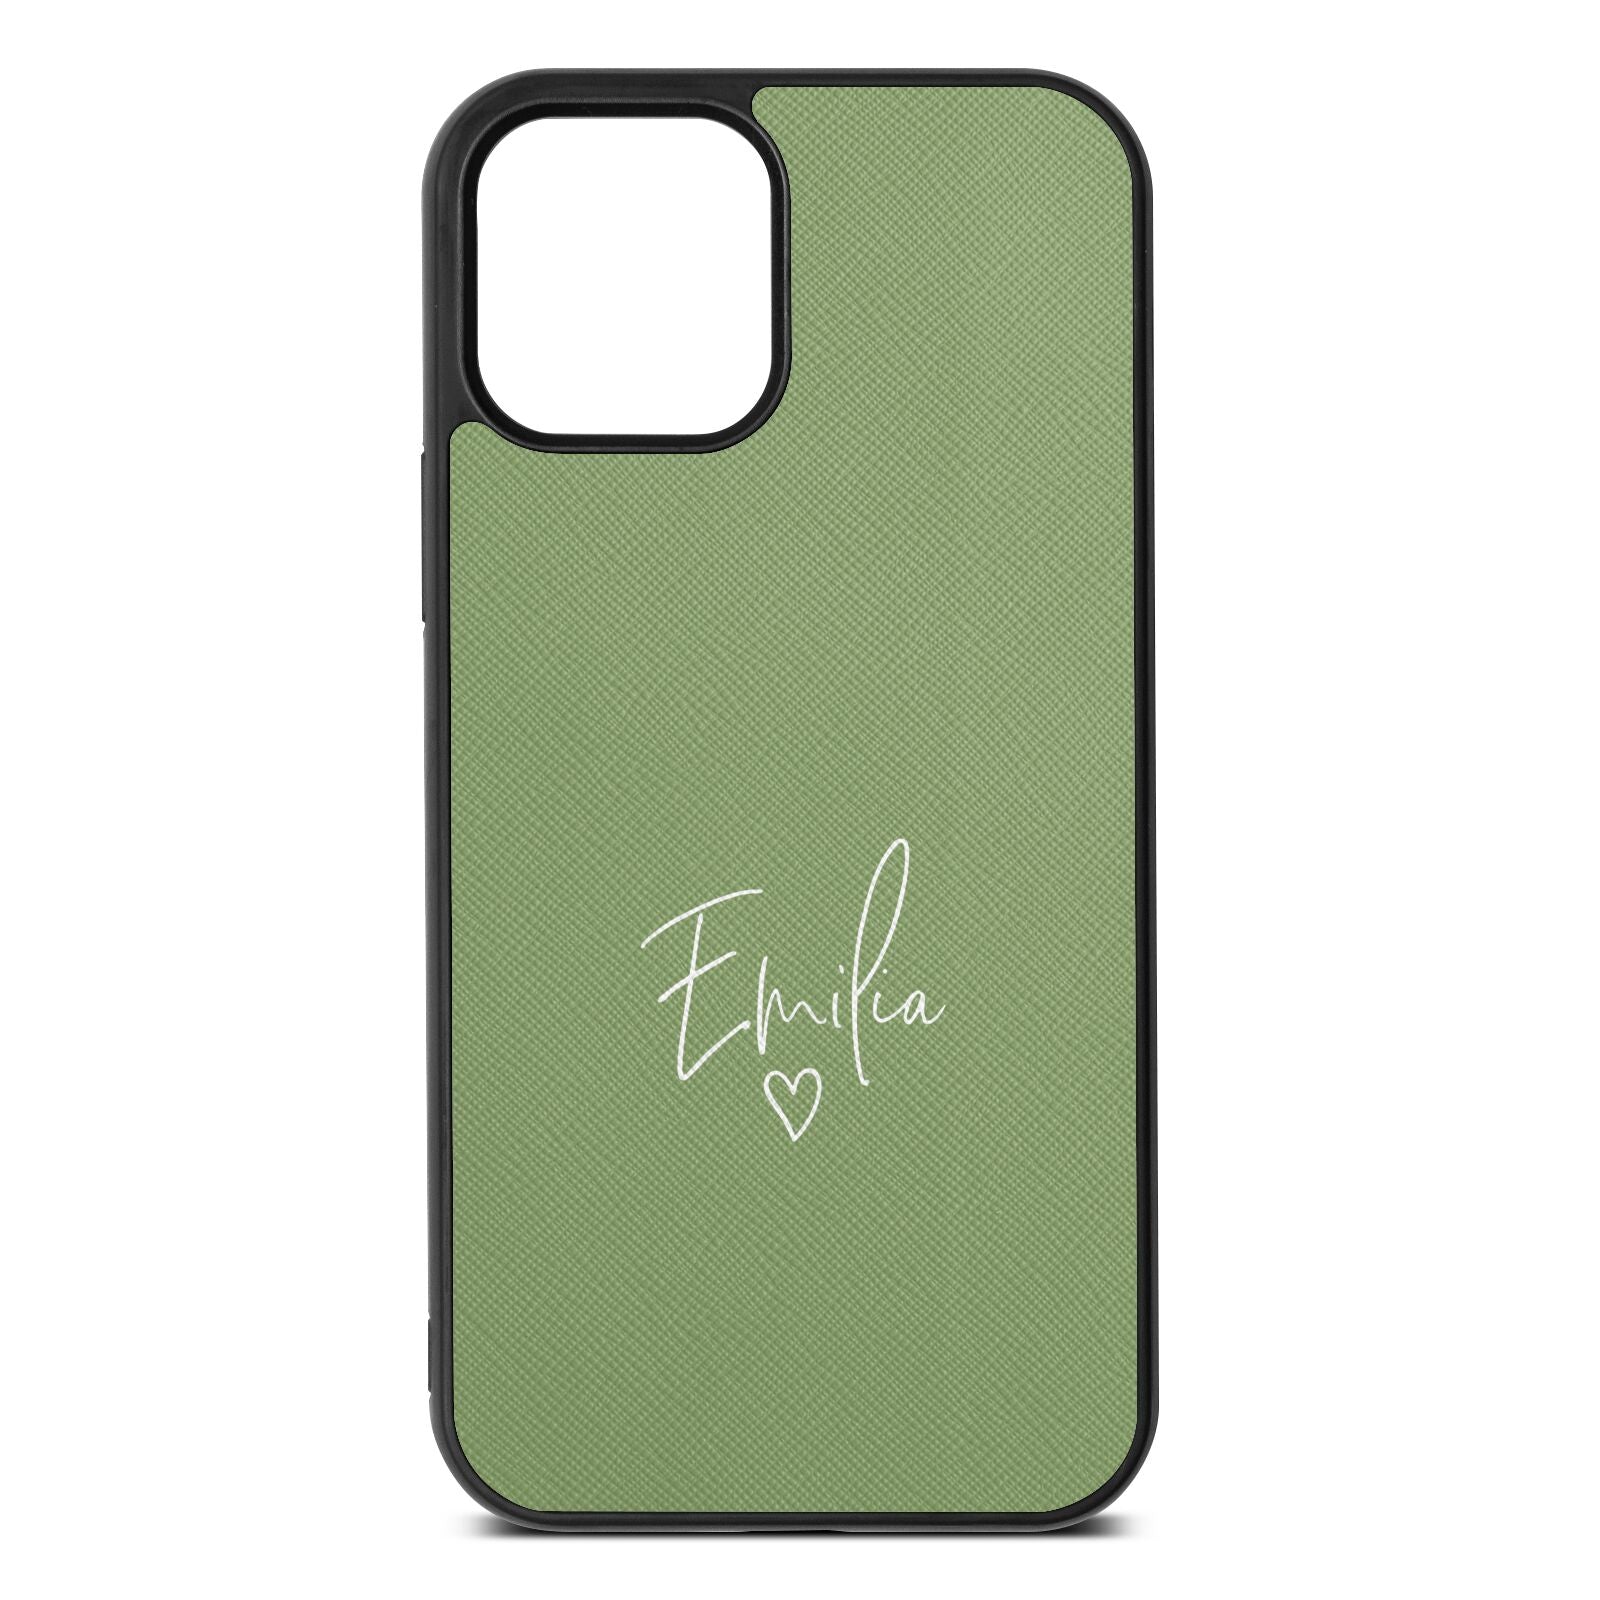 White Handwritten Name Transparent Lime Saffiano Leather iPhone 12 Case